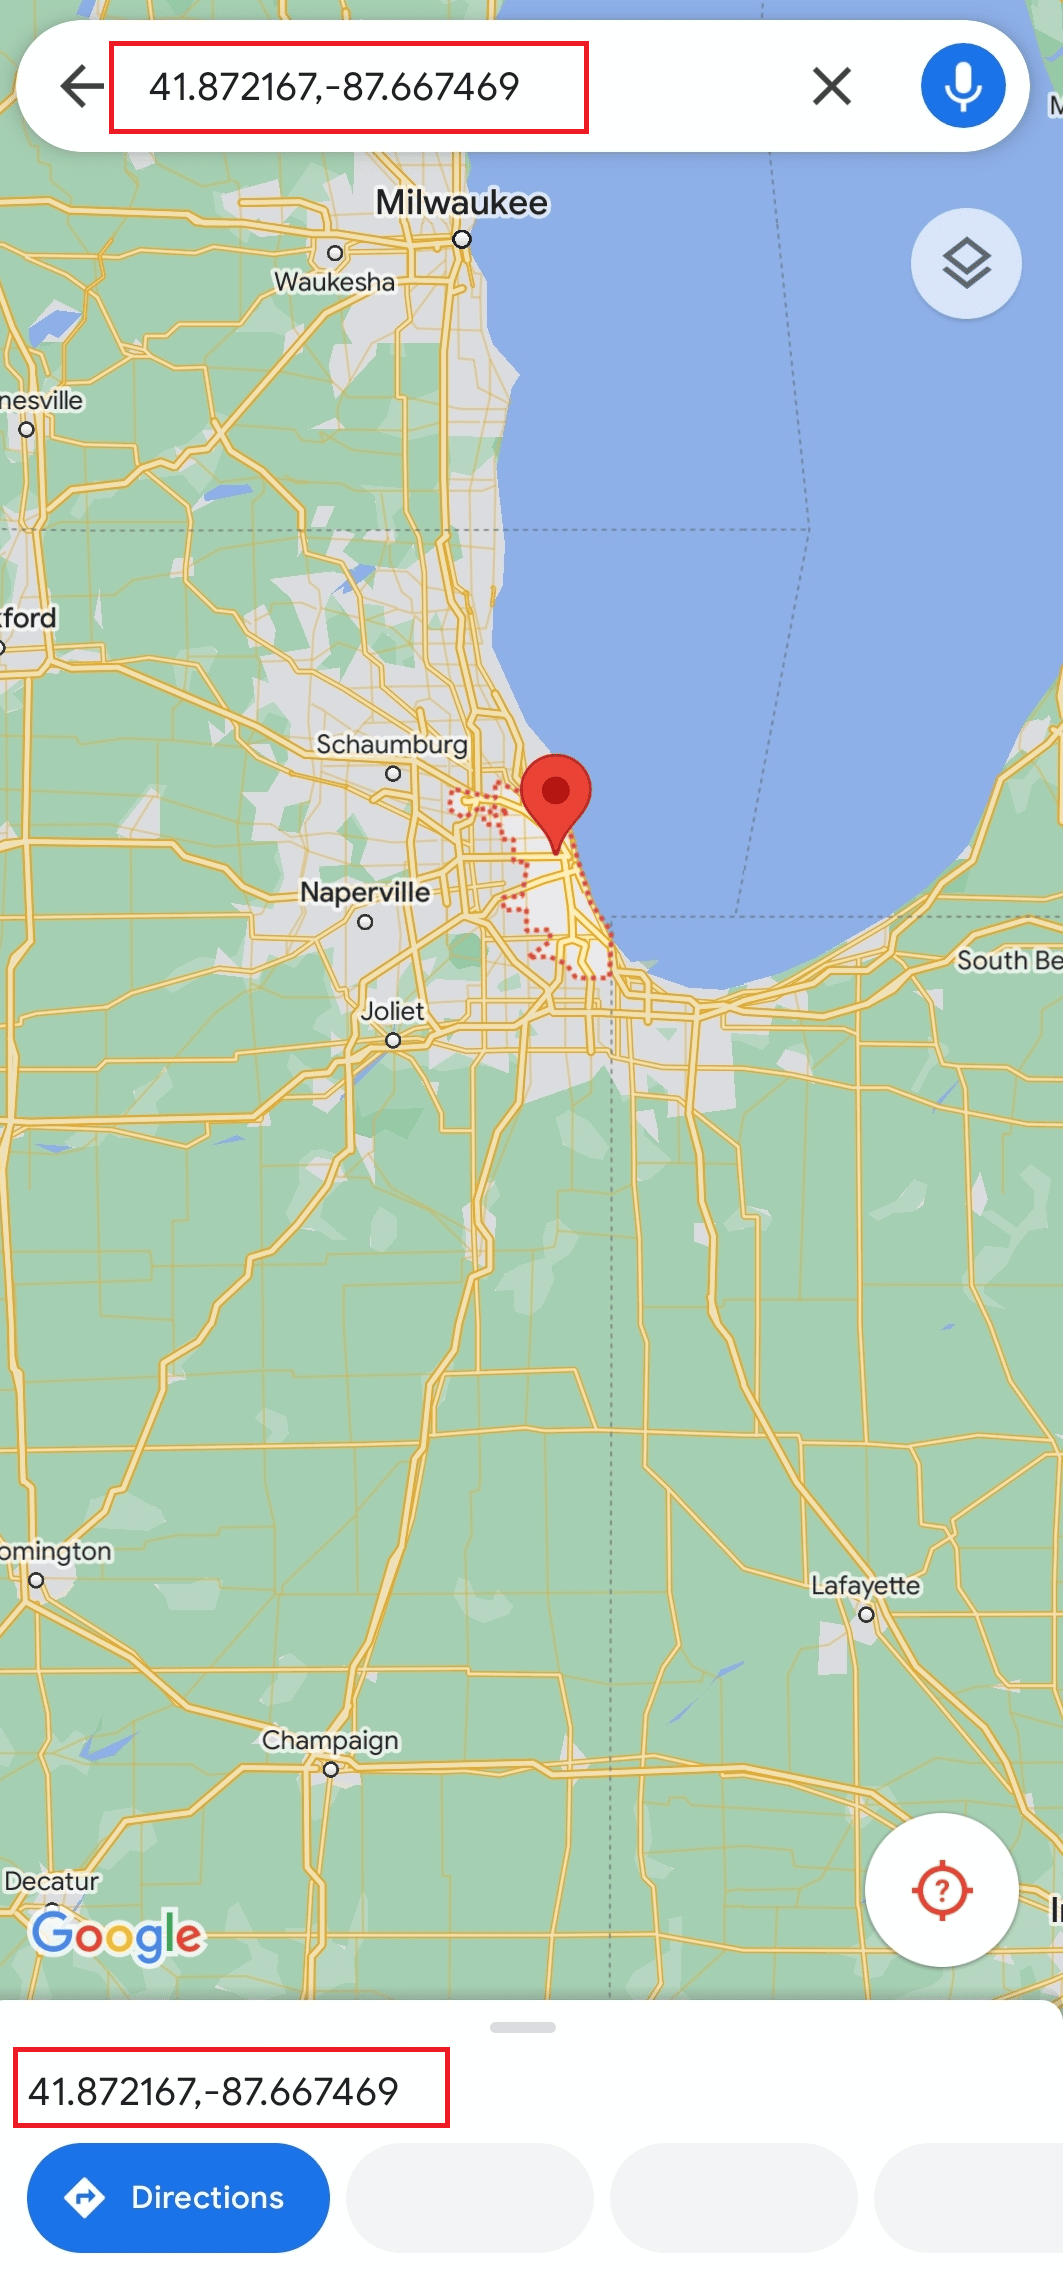 Find Chicago and long-press the location on your mobile screen to get the coordinates (41.87216, - 87.66746) 